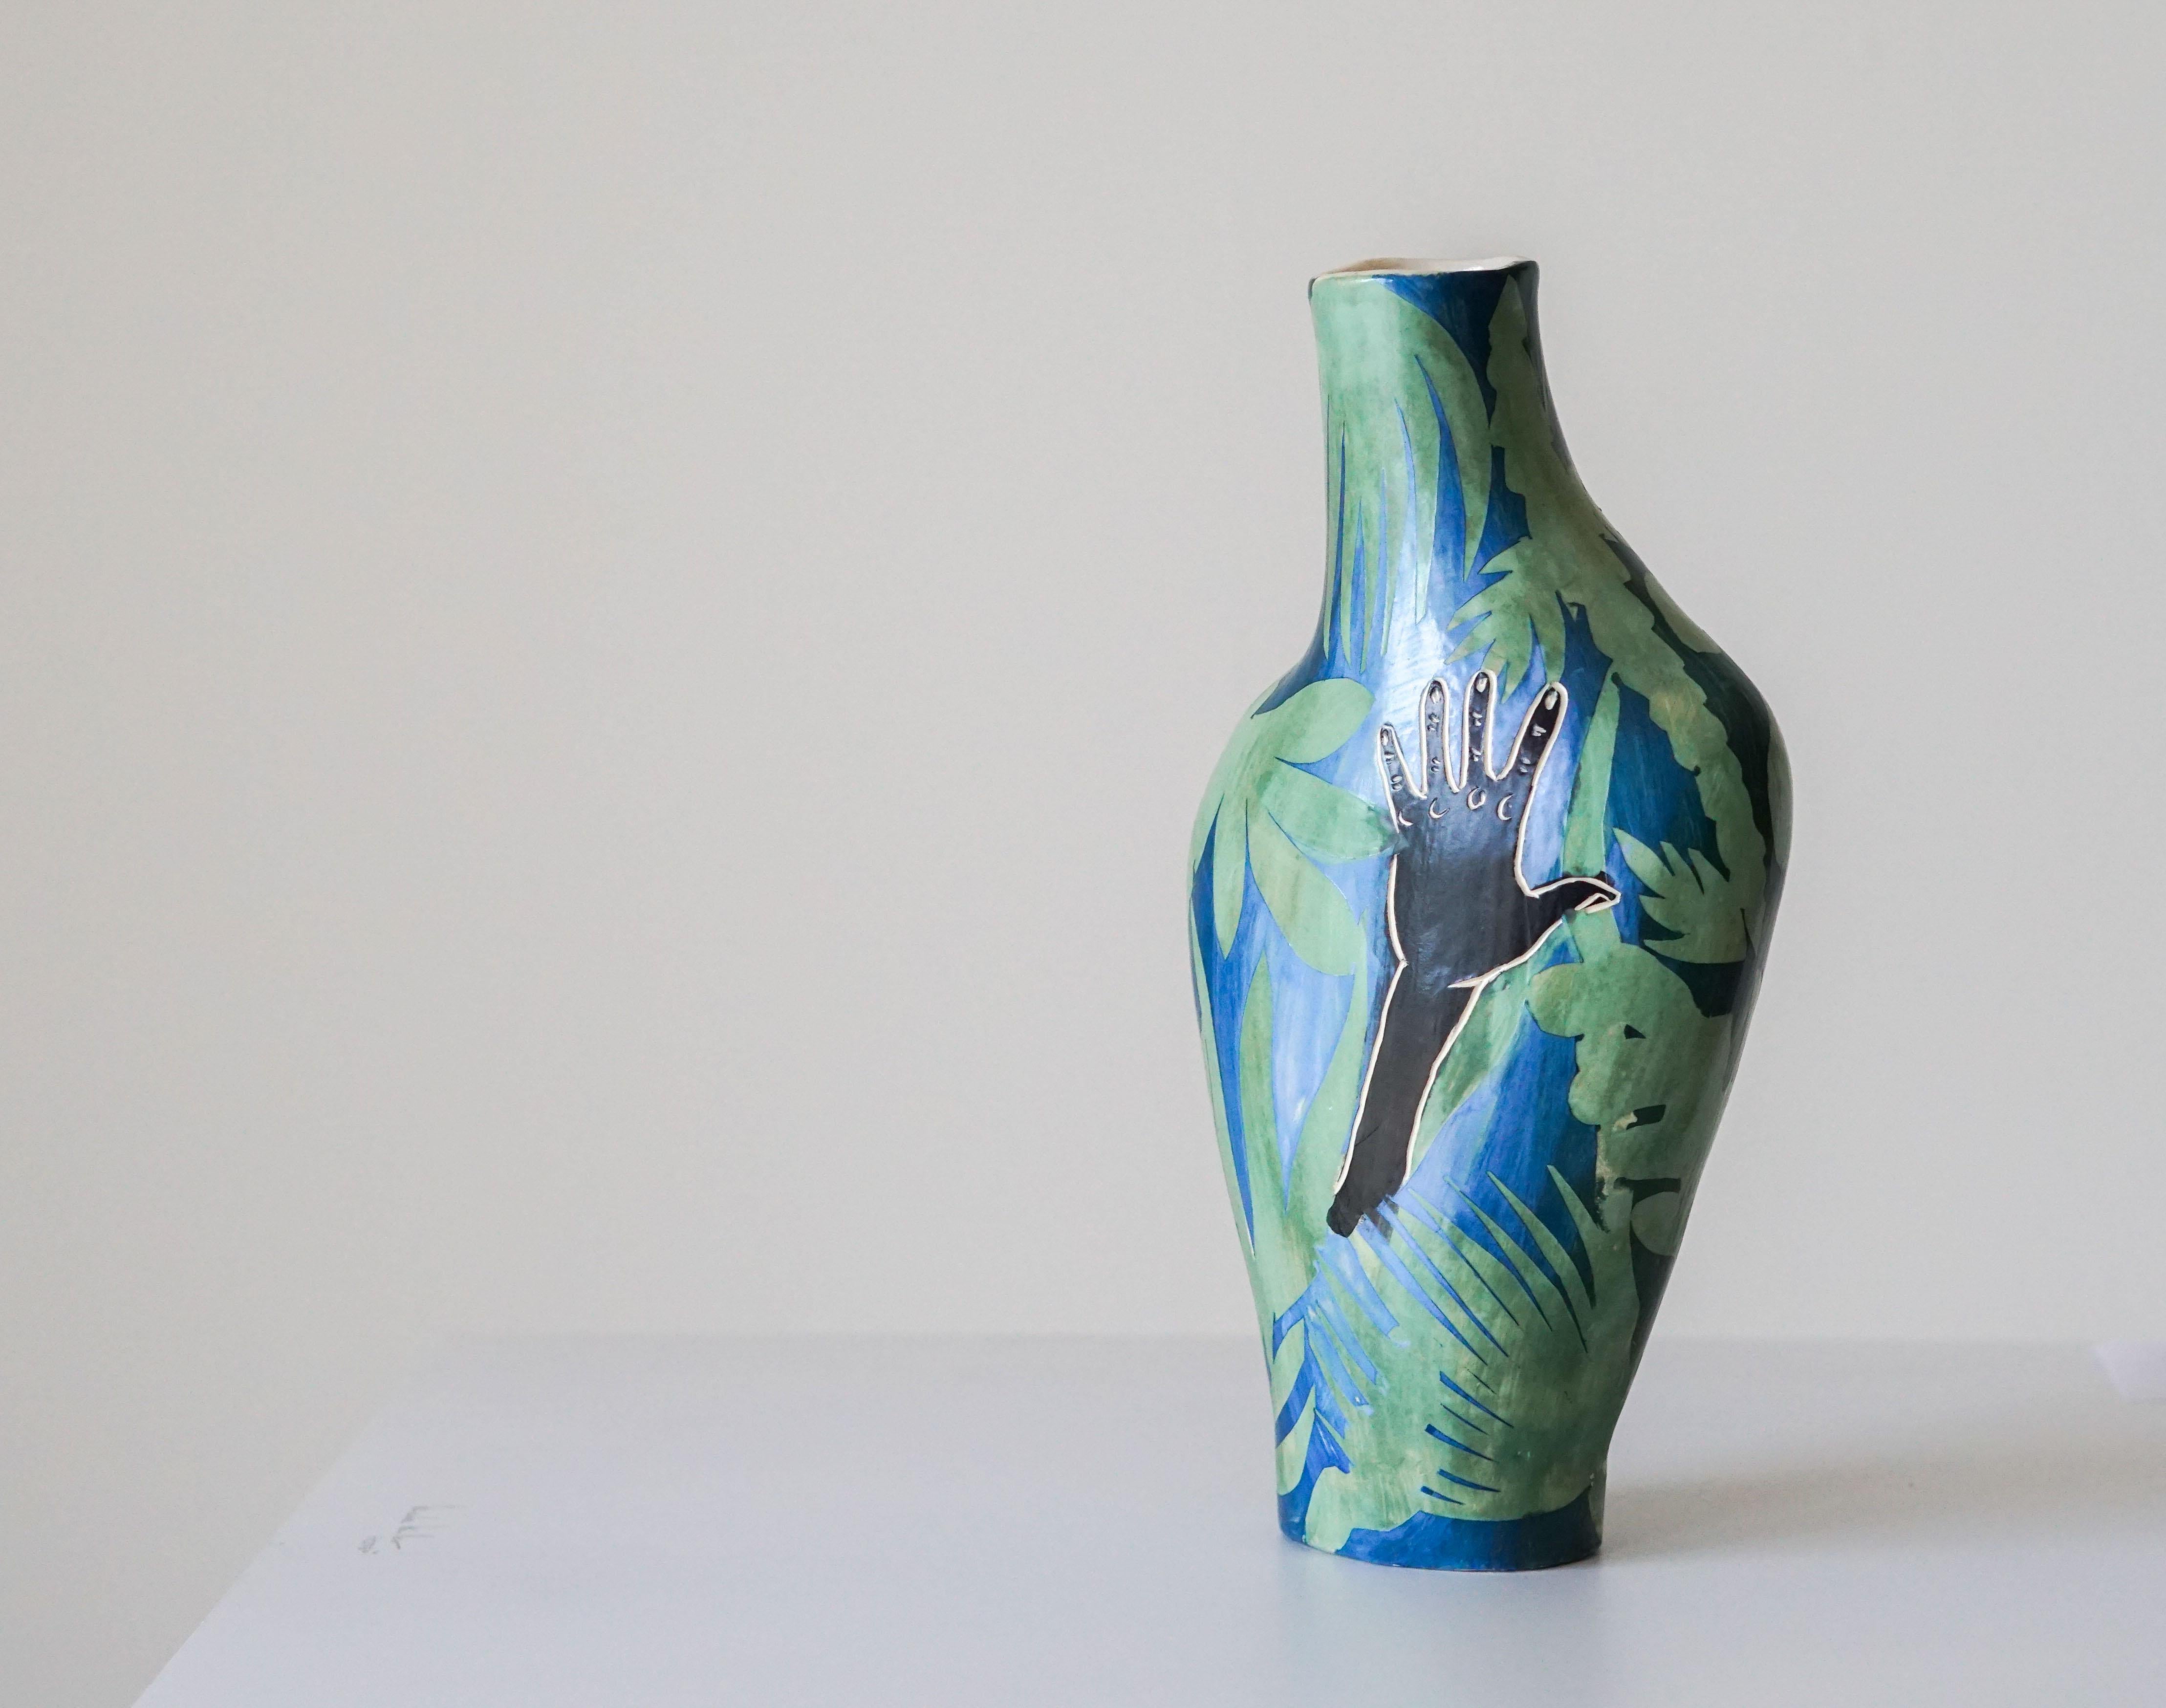 Helping Hand
Ceramic vase with underglaze Sgraffito detailing

This ceramic vase features lush, vibrant plant forms. On each side, a hand emerges as if to reach for something. The title references both the vulnerability of the earth and humanity and